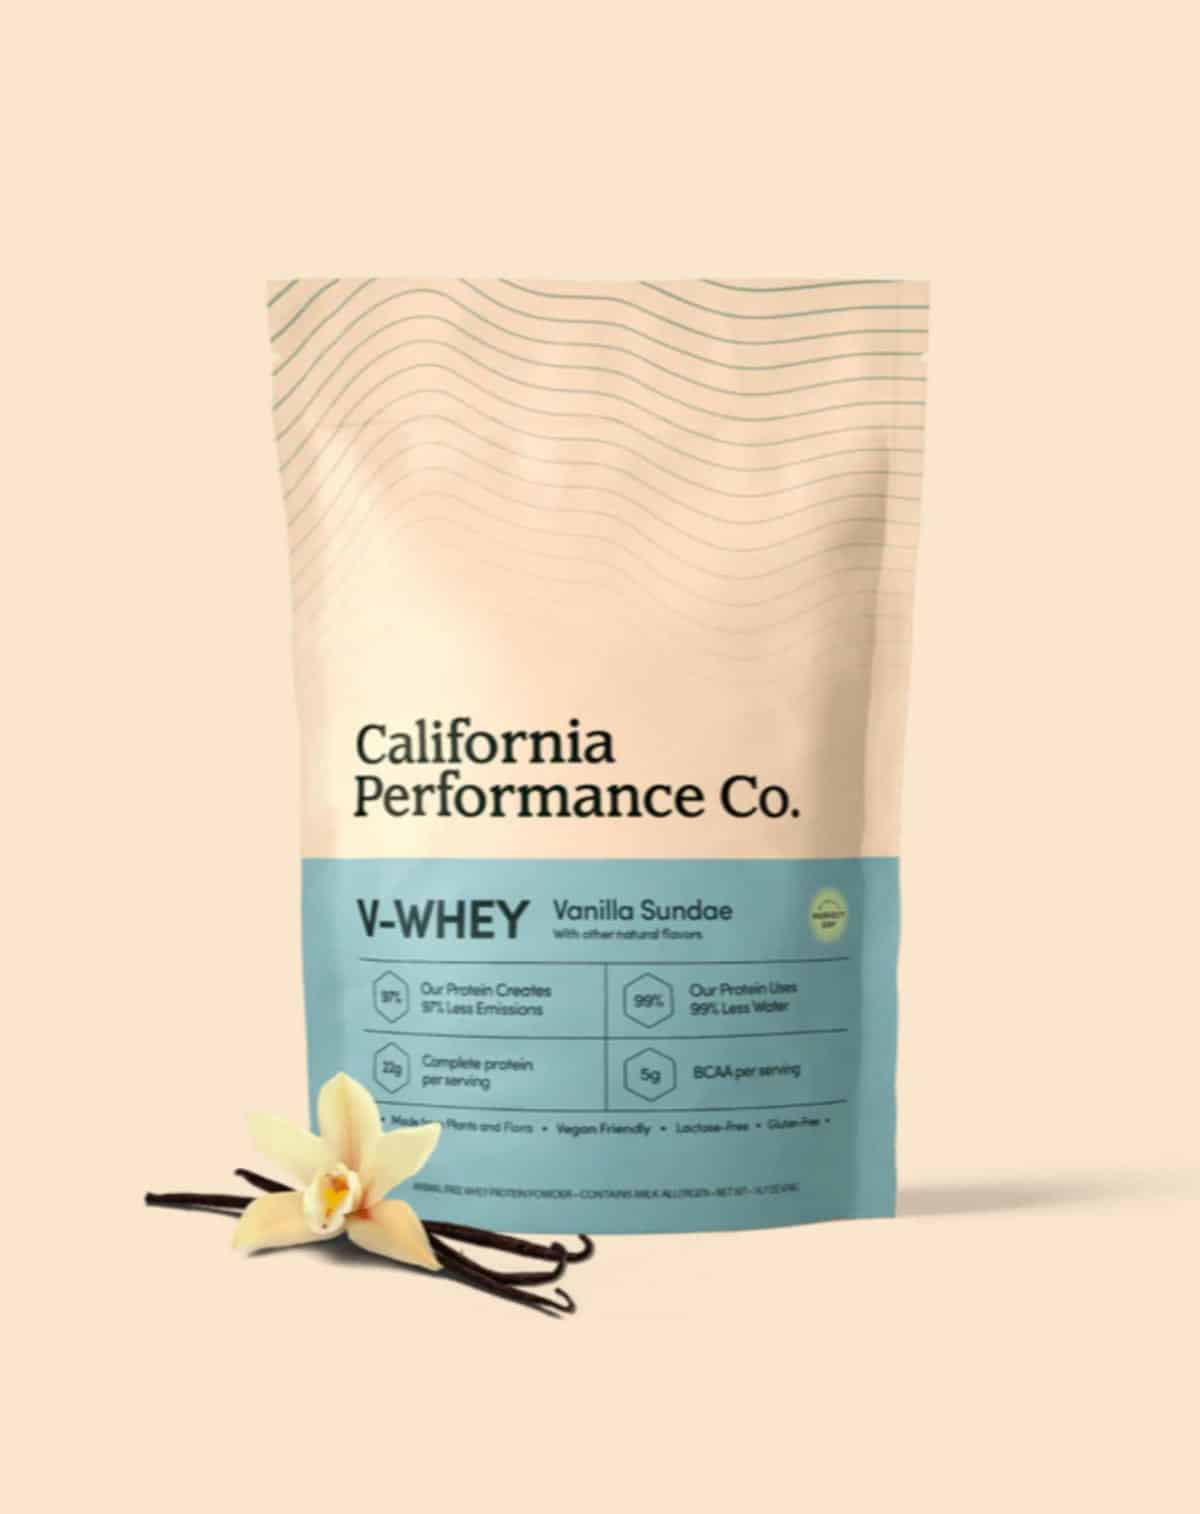 Package of California Performance Co. V-Whey vanilla sundae flavored protein powder.